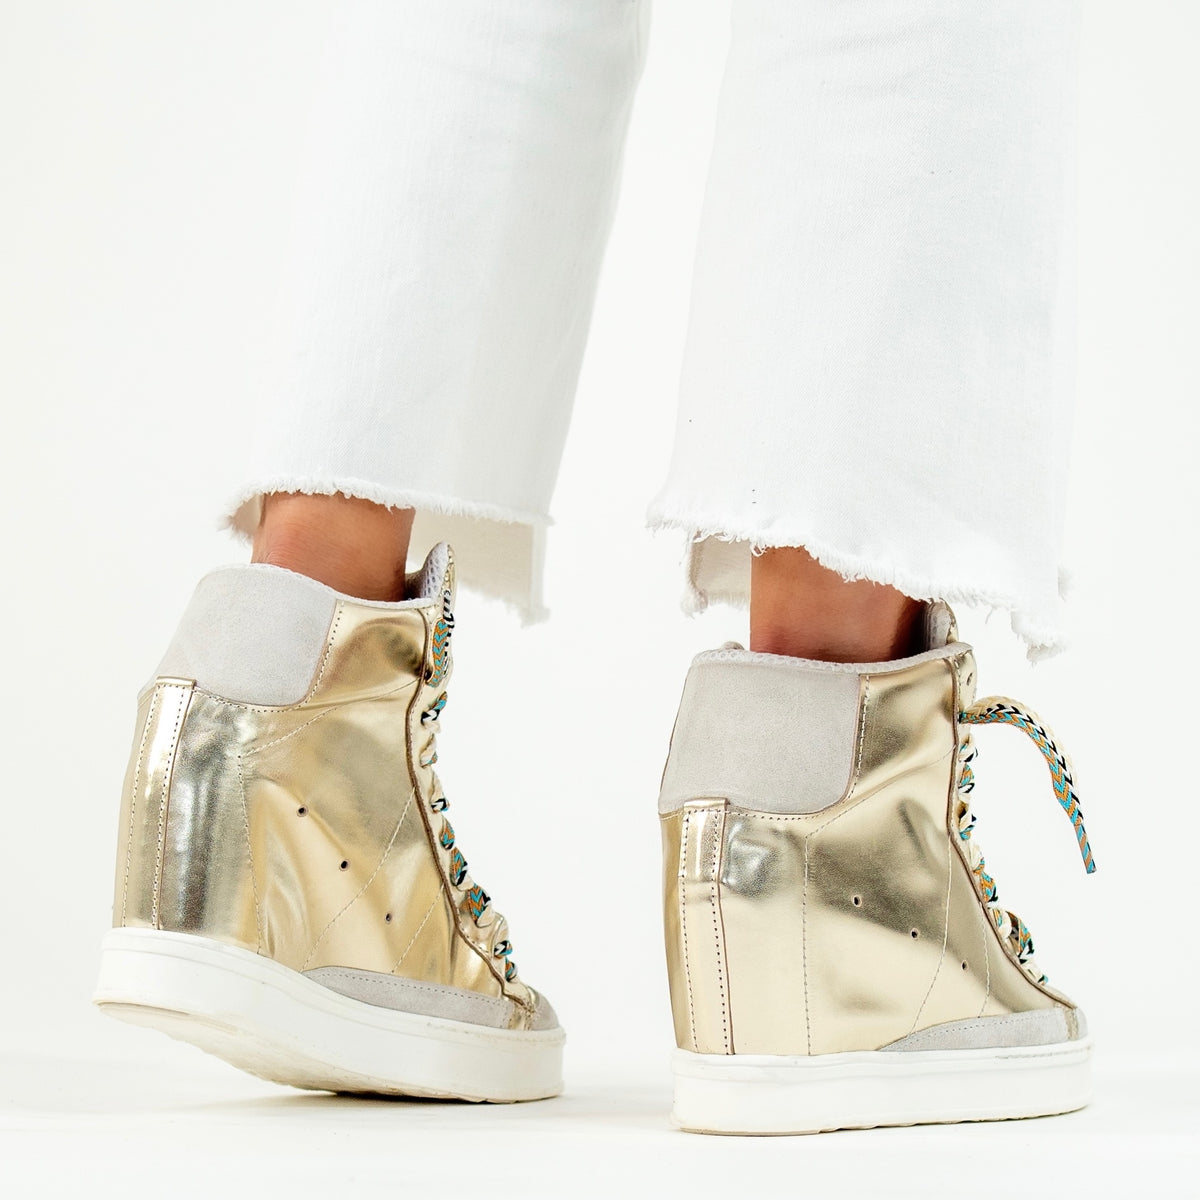 Fearless 2.0 Ouro Wedge Sneaker